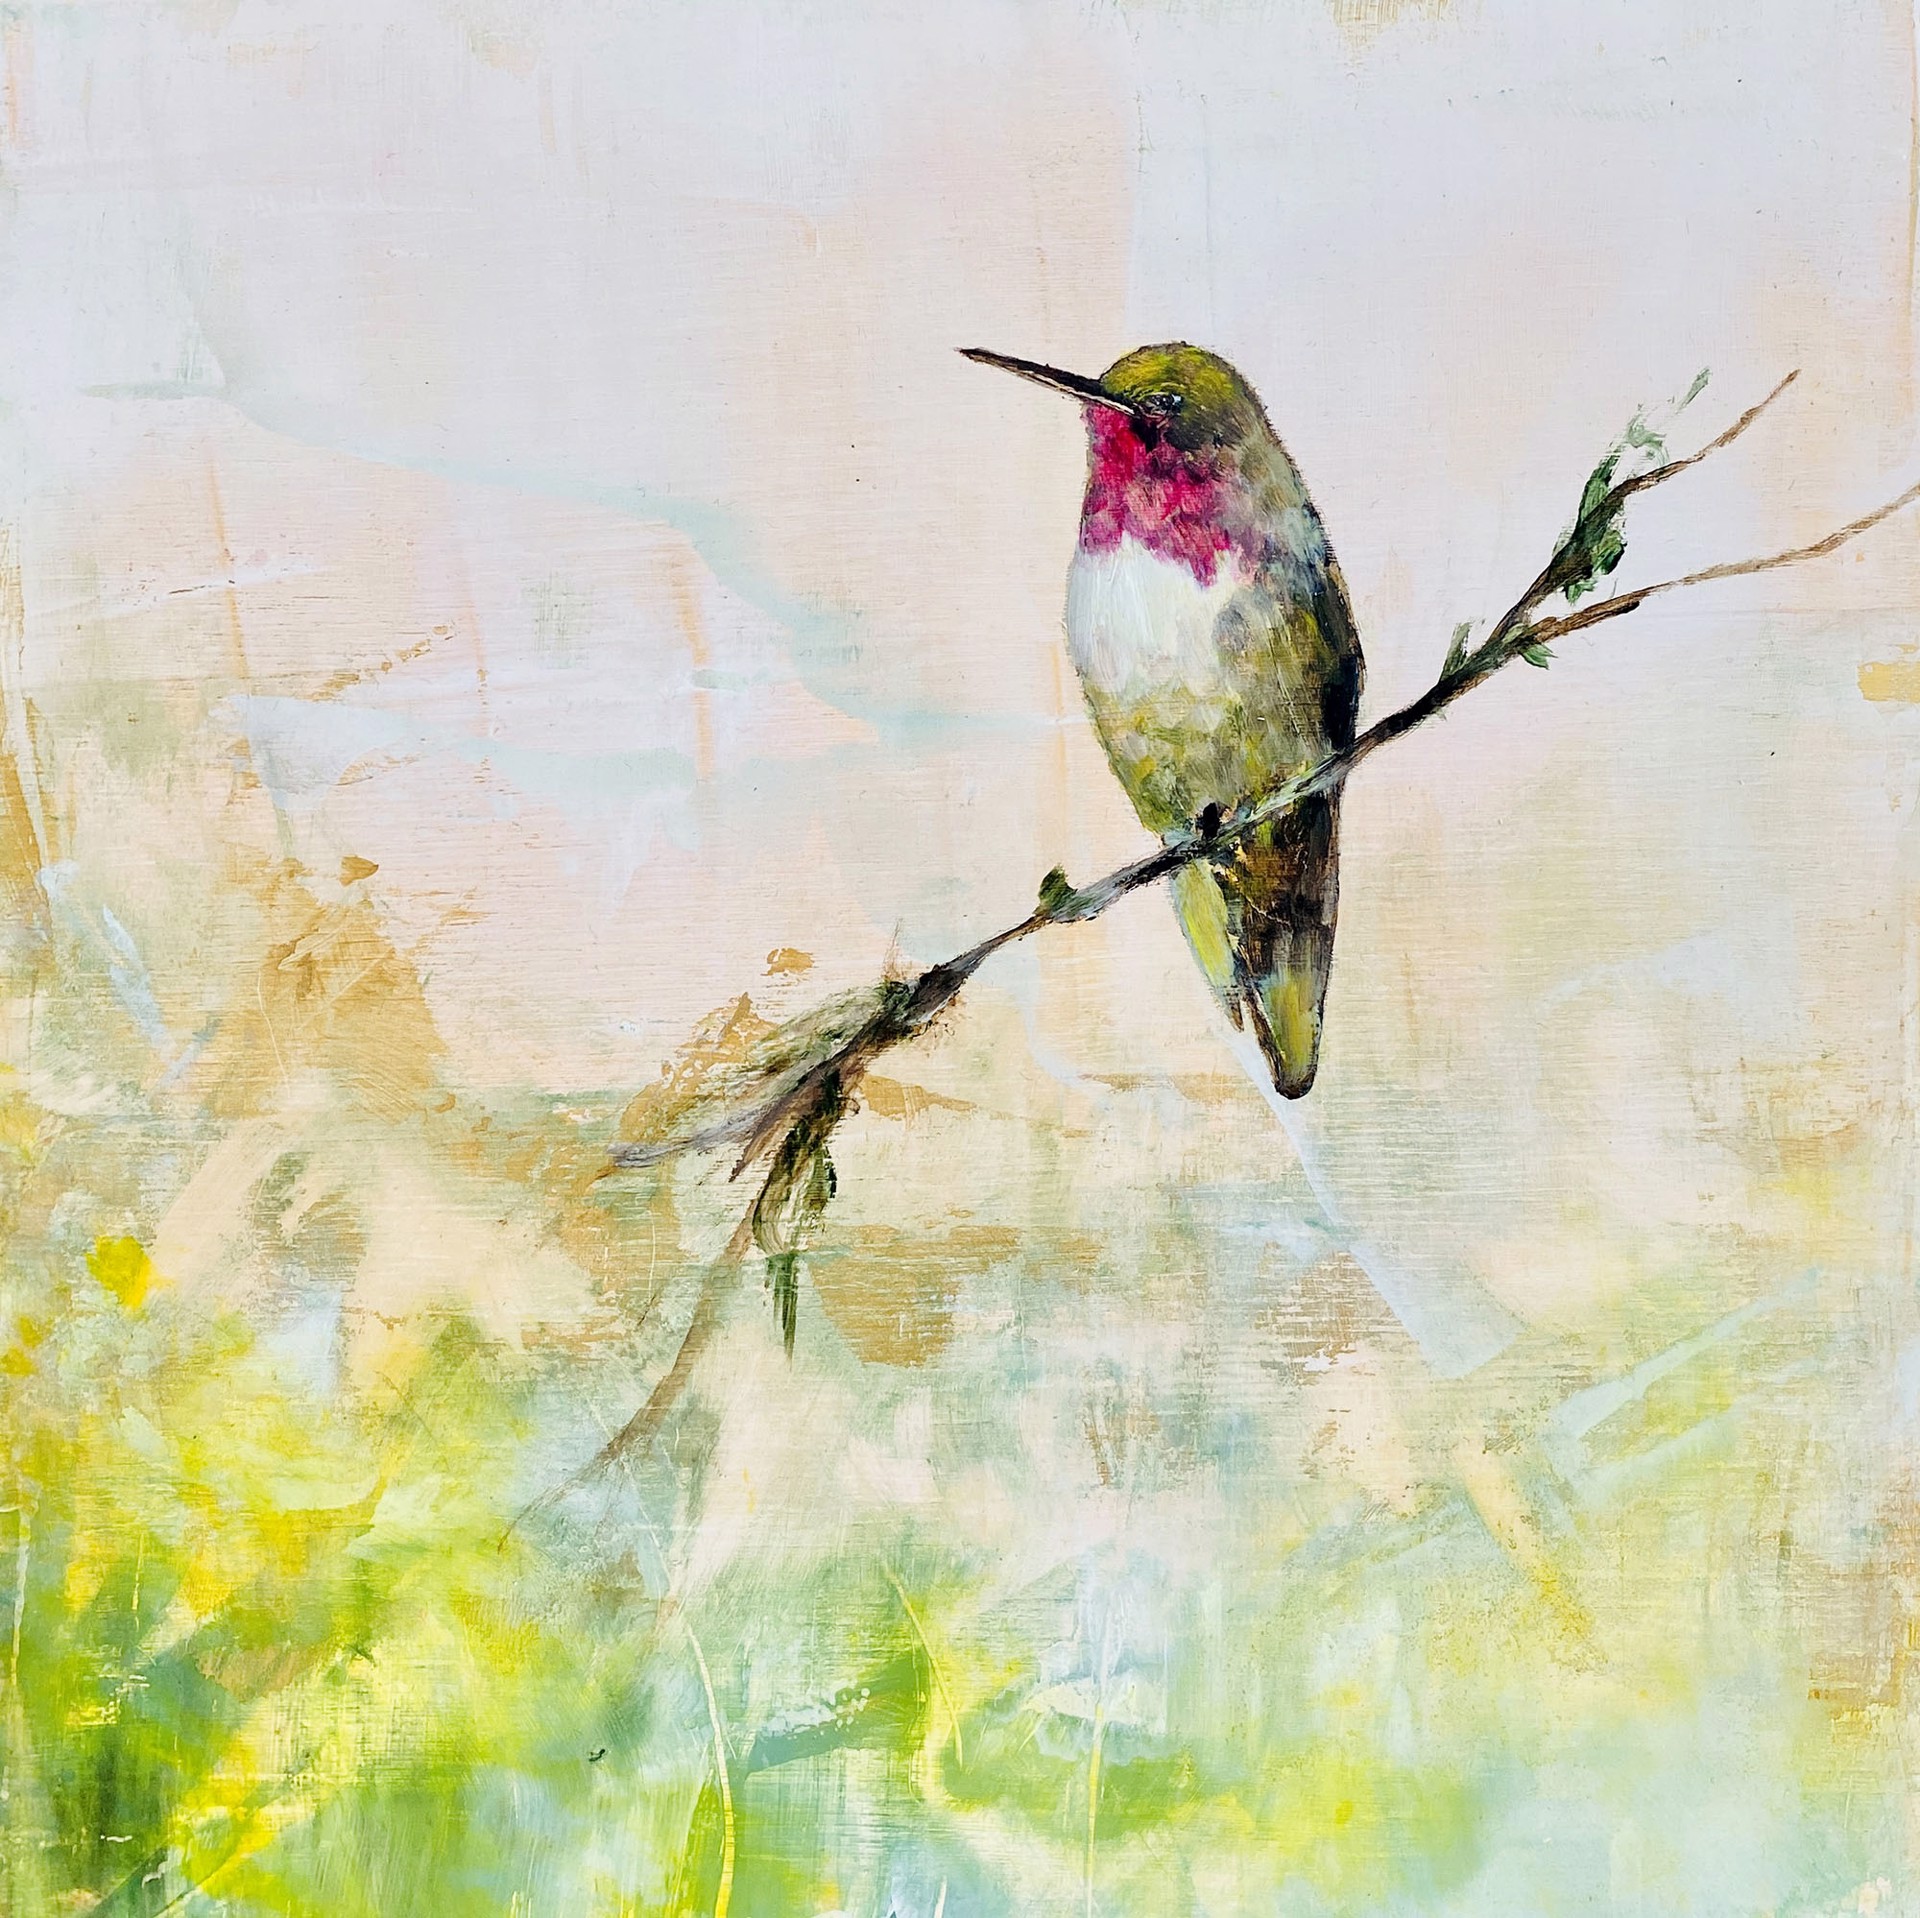 Original Oil Painting Featuring A Humming Bird On Branch Over Green Abstract Background